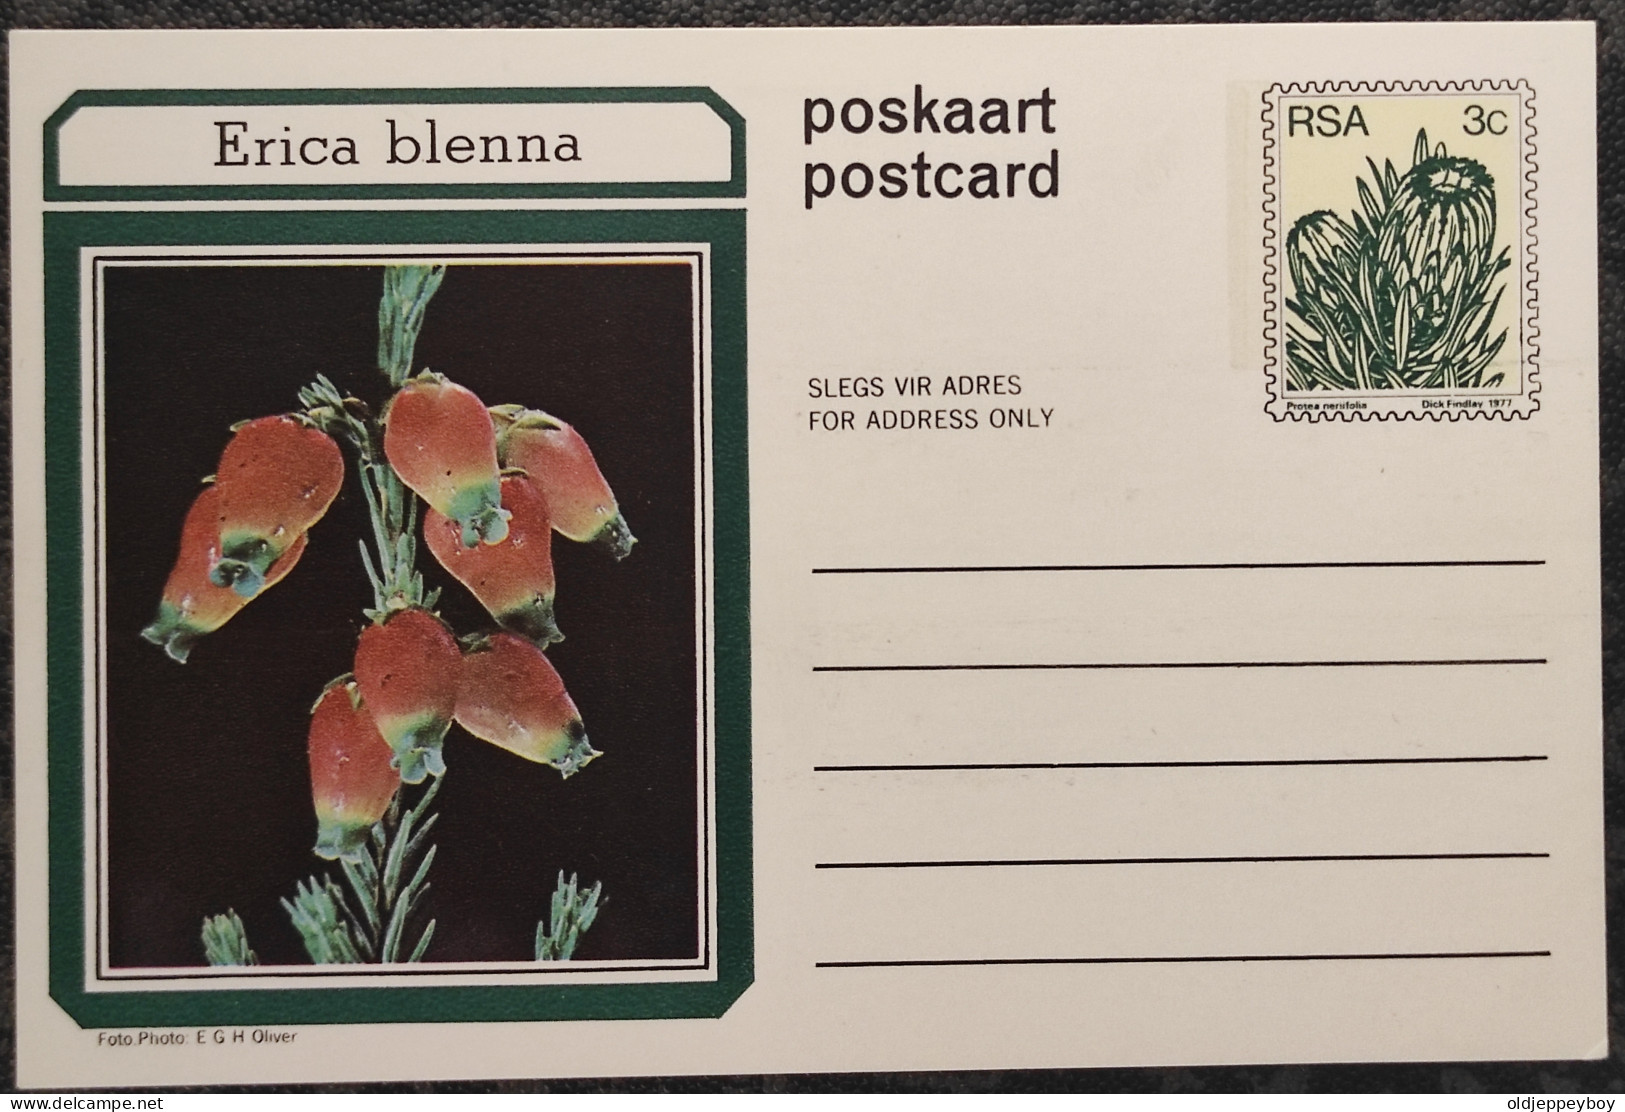 3c SOUTH AFRICA Postal STATIONERY CARD Illus ERICA BLENNA FLOWER Cover Stamps Flowers Rsa - Covers & Documents